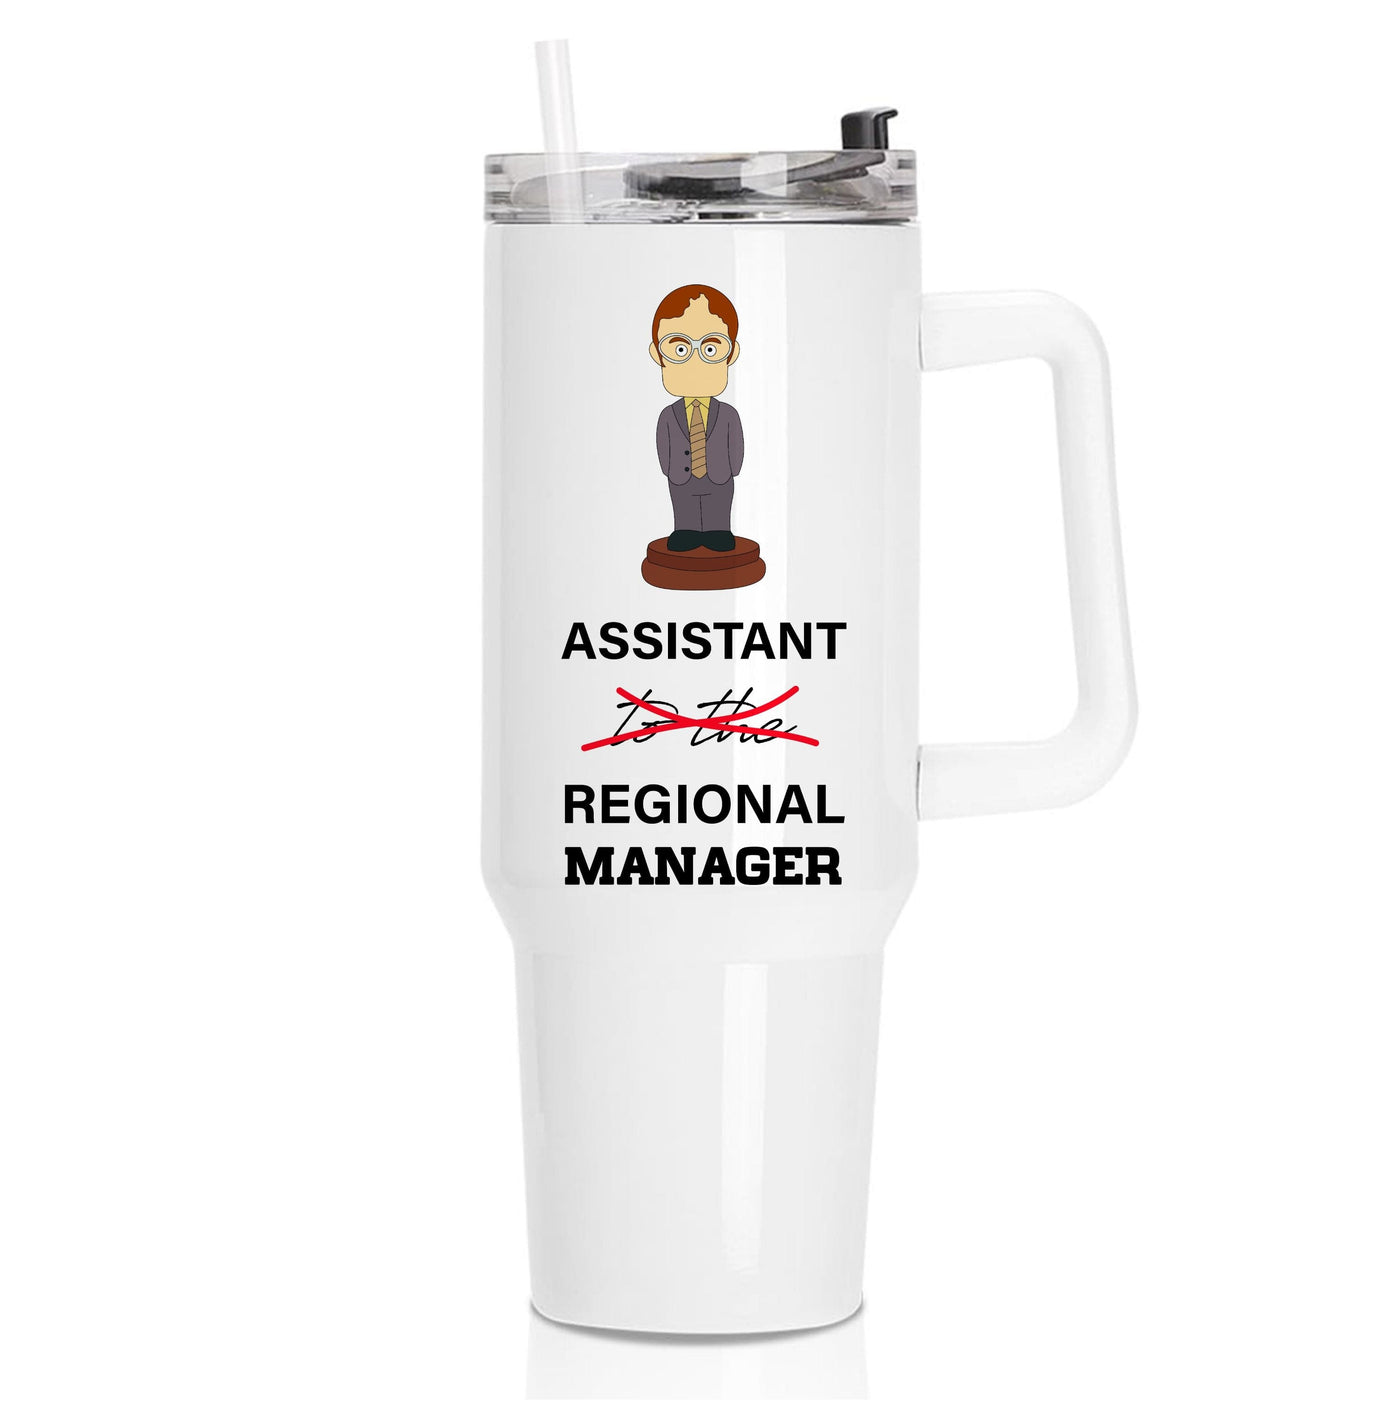 Assistant Regional Manager - The Office Tumbler